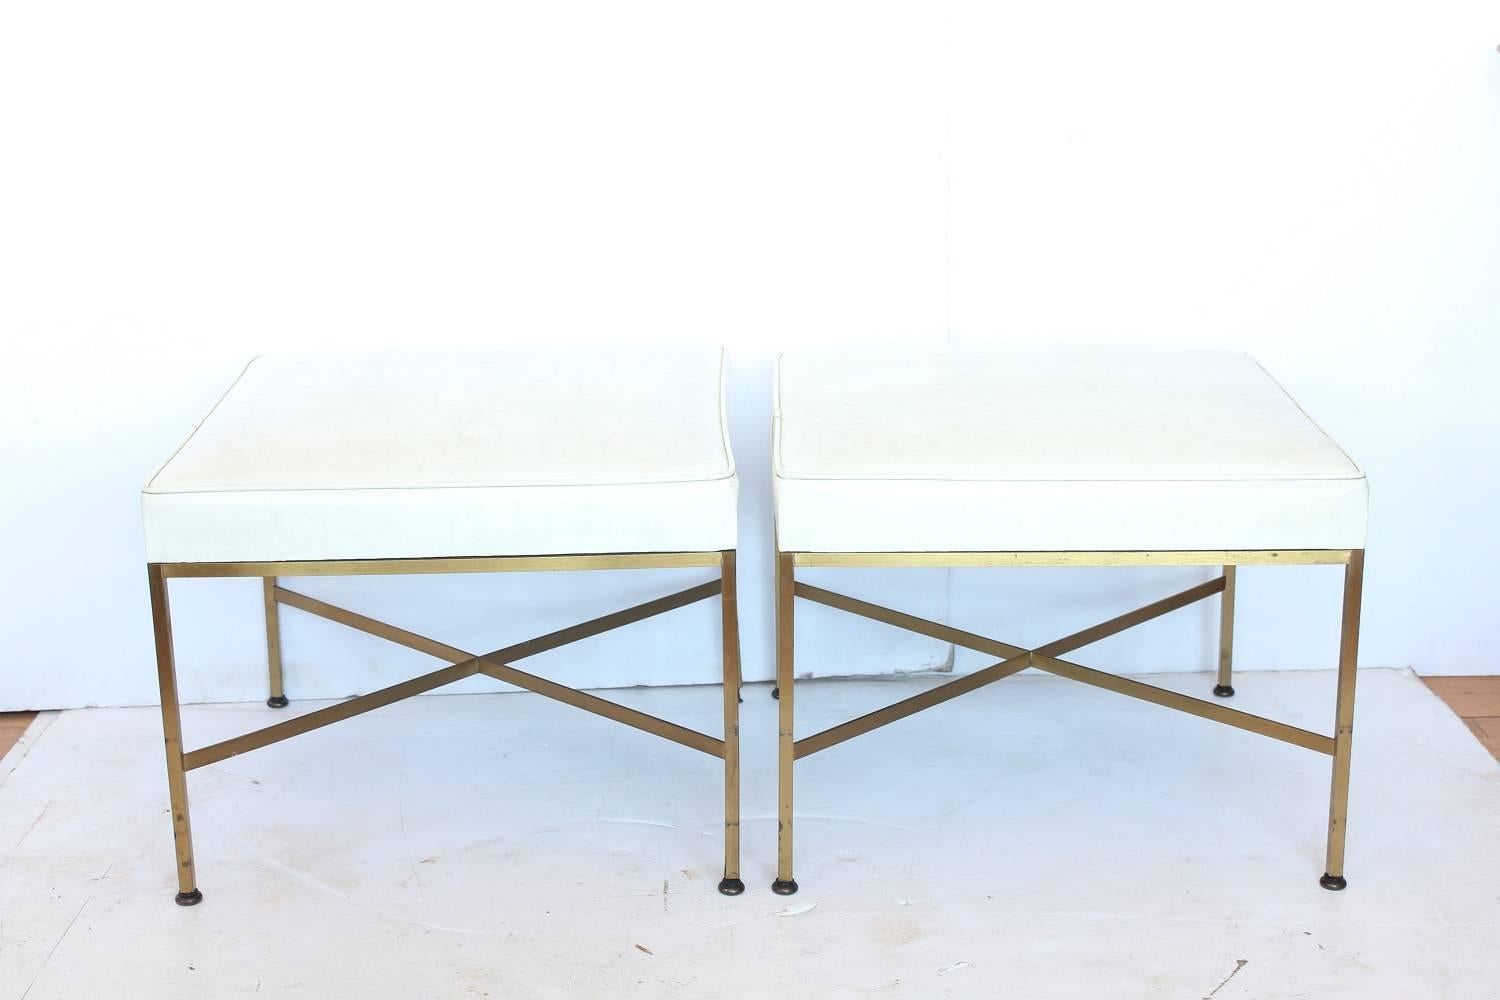 Pair of X -base brass and leather stools/benches by Paul McCobb.